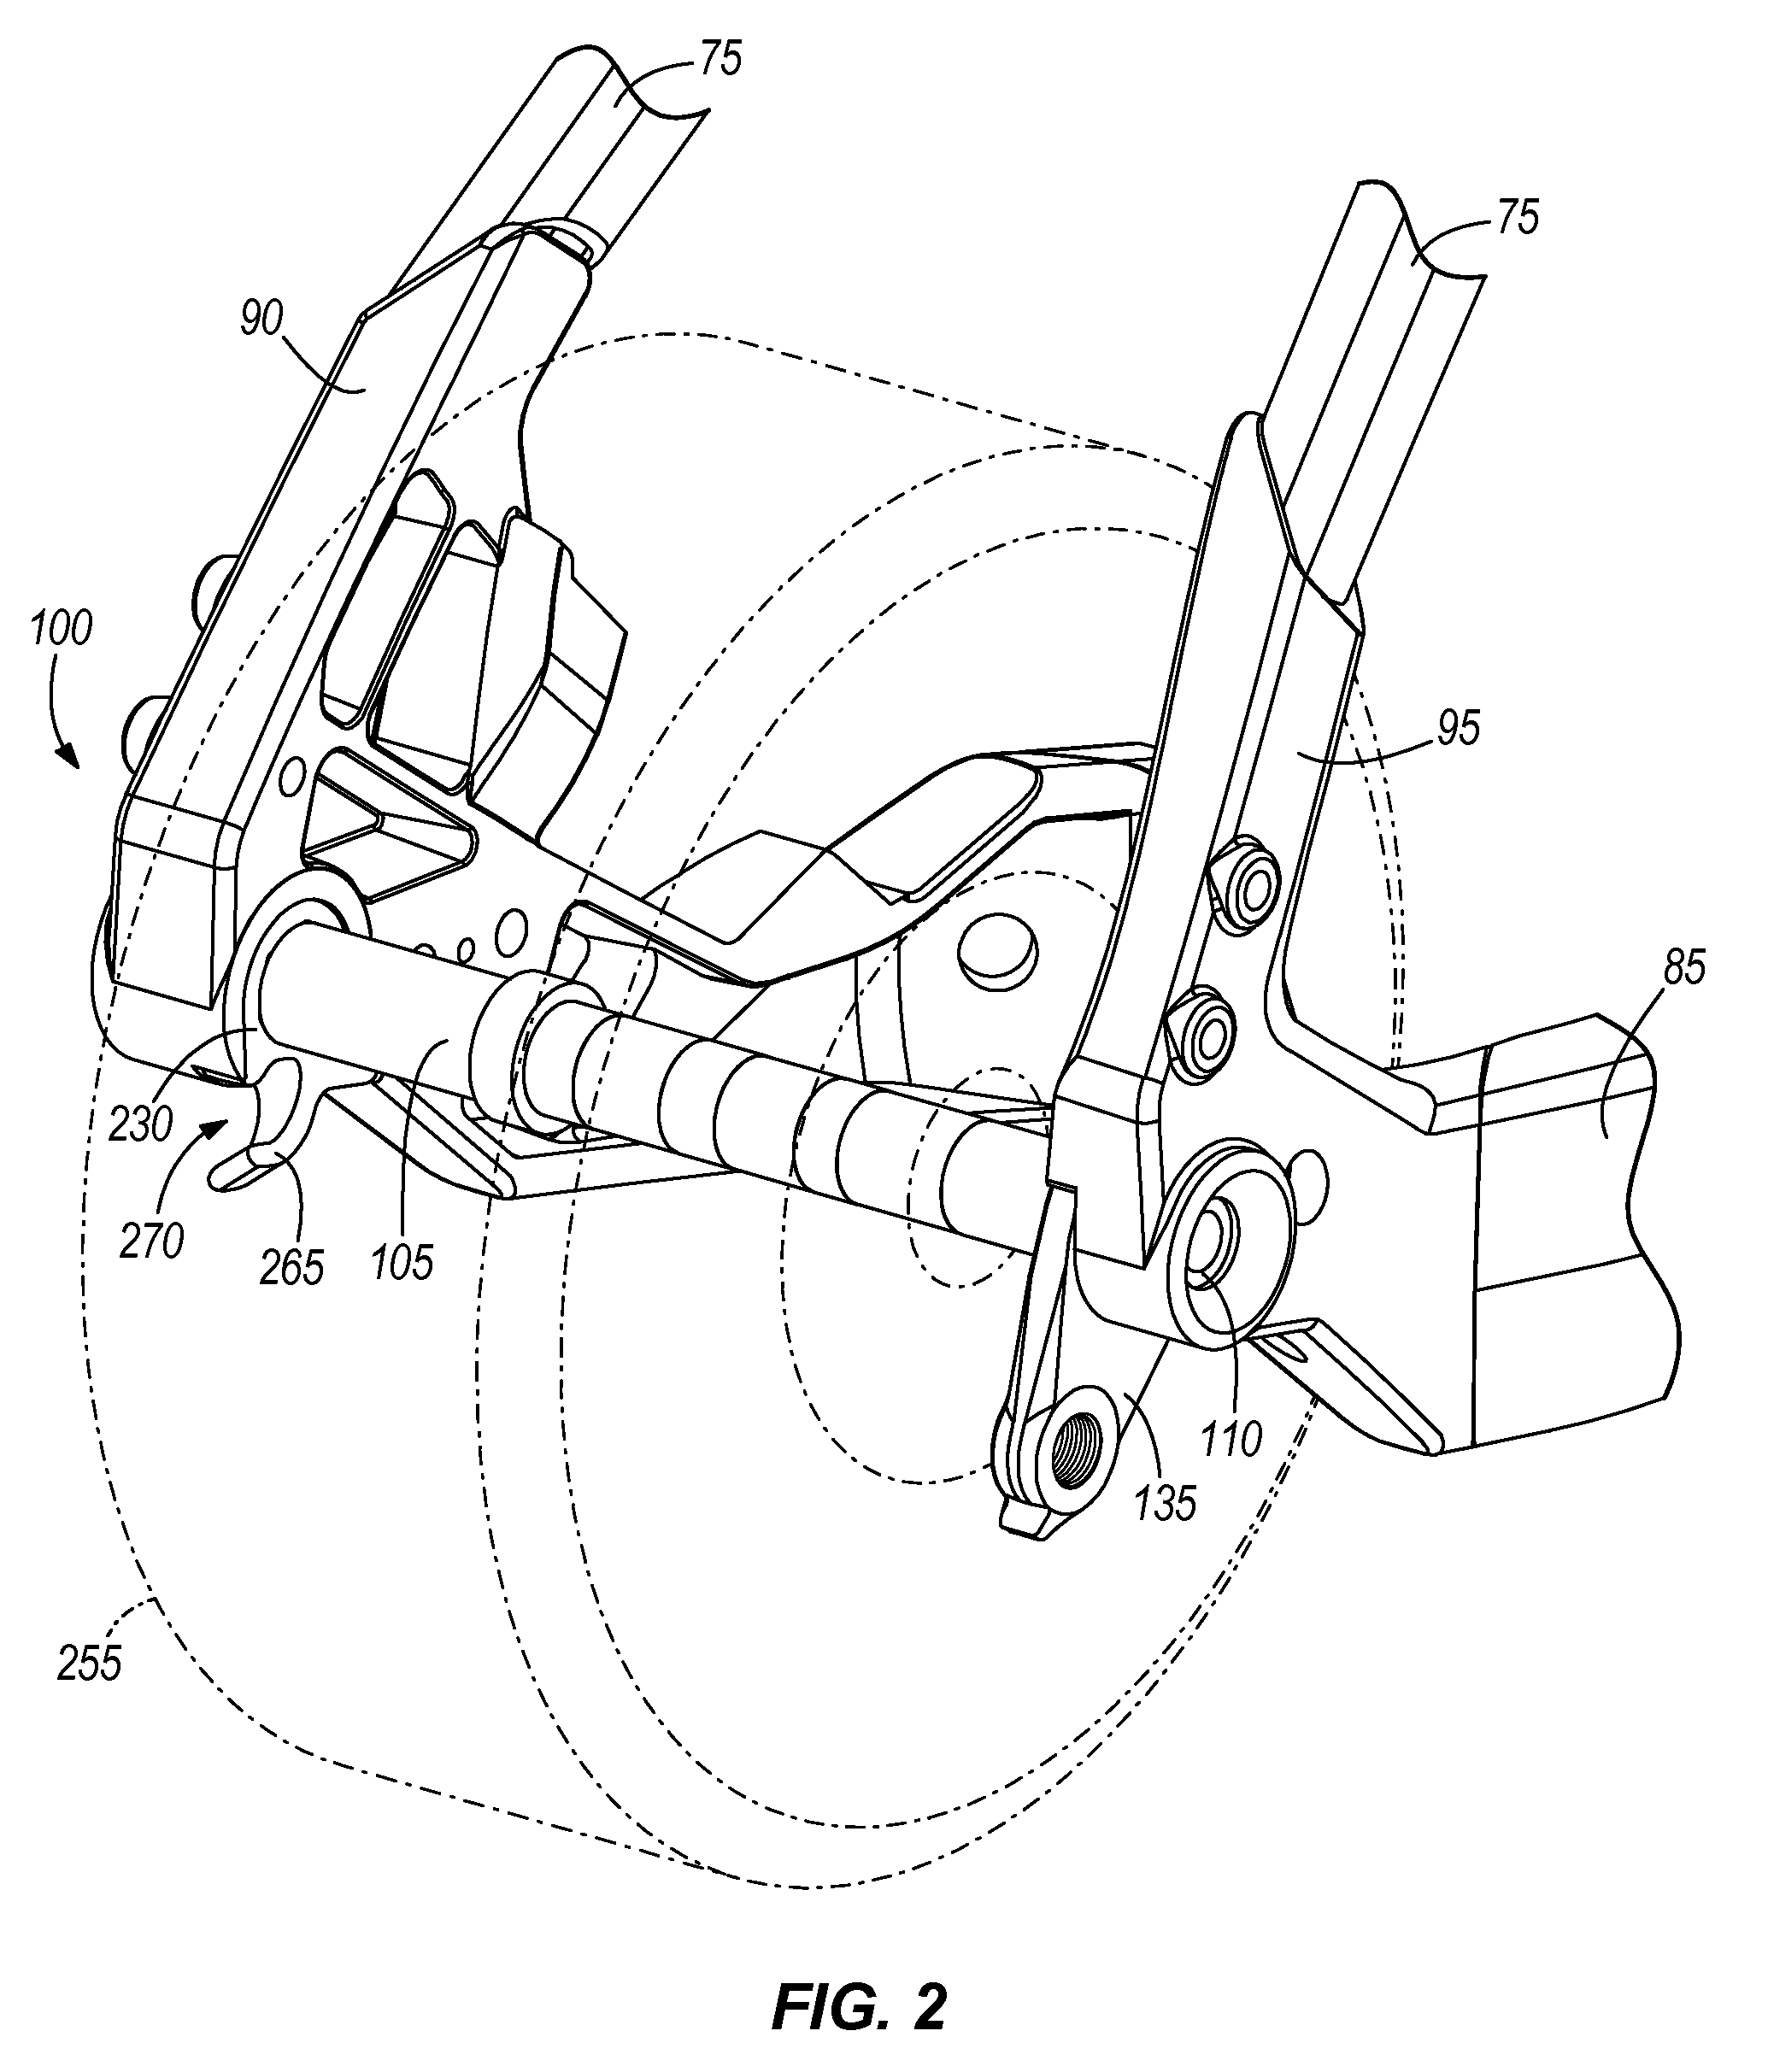 Torque element for a motor-driven bicycle